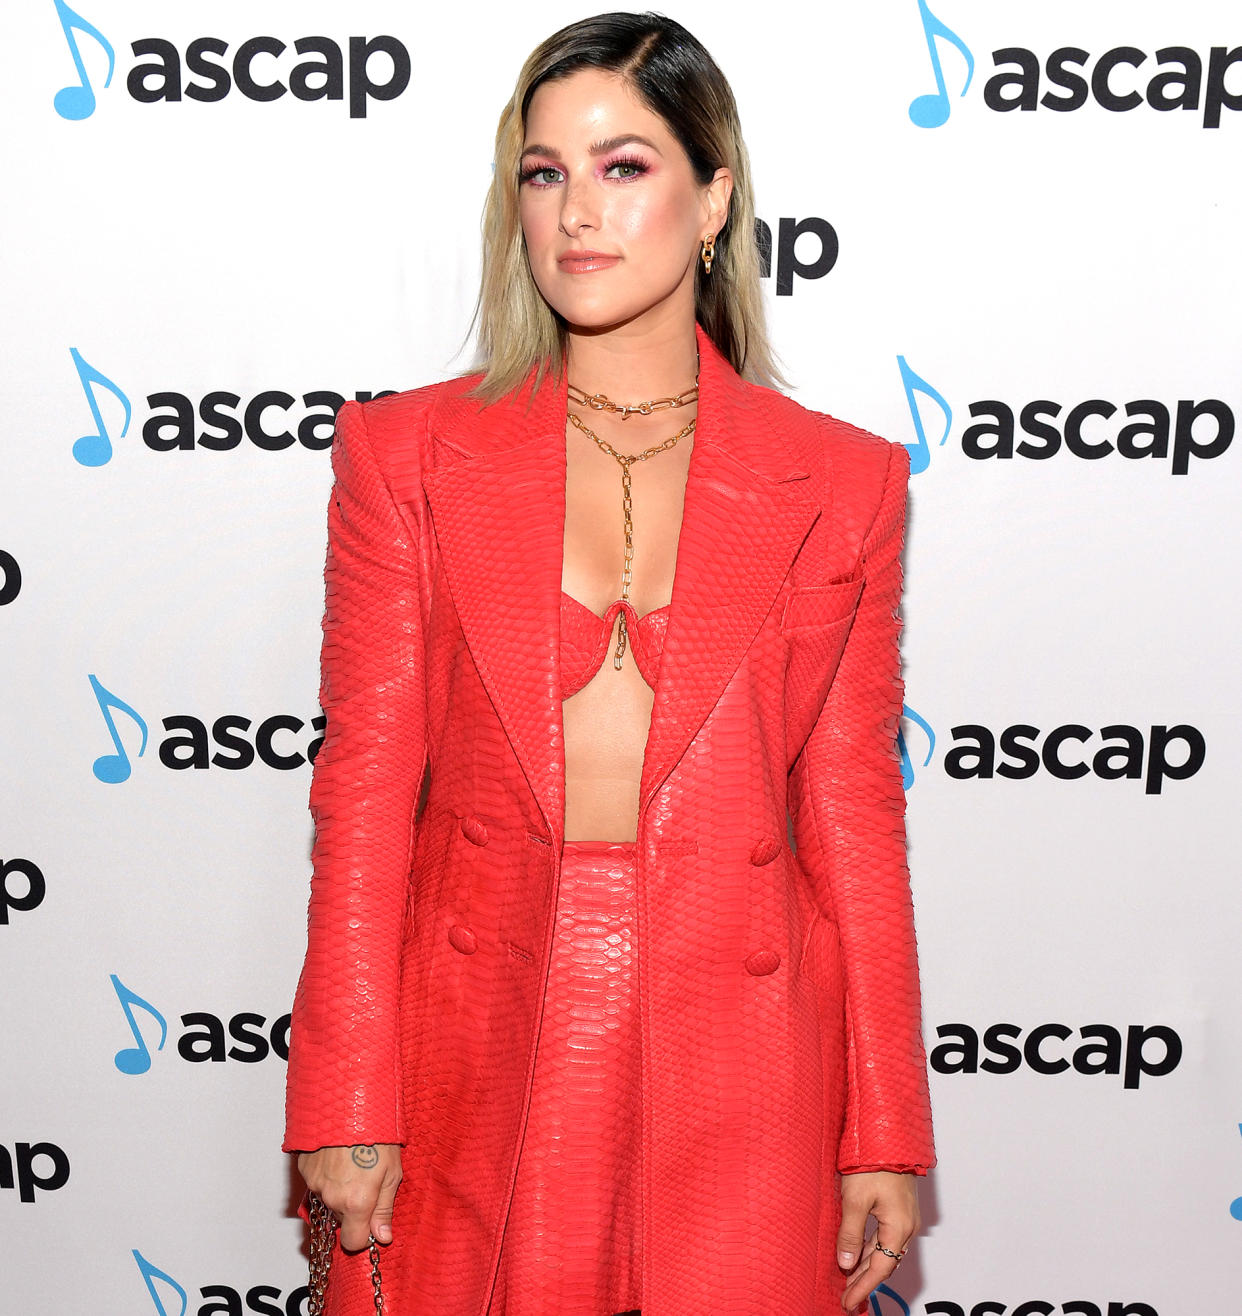 Cassadee Pope Reveals She’s Trading Country Music for Rock So She Won’t Be ‘Shamed for Speaking Out’